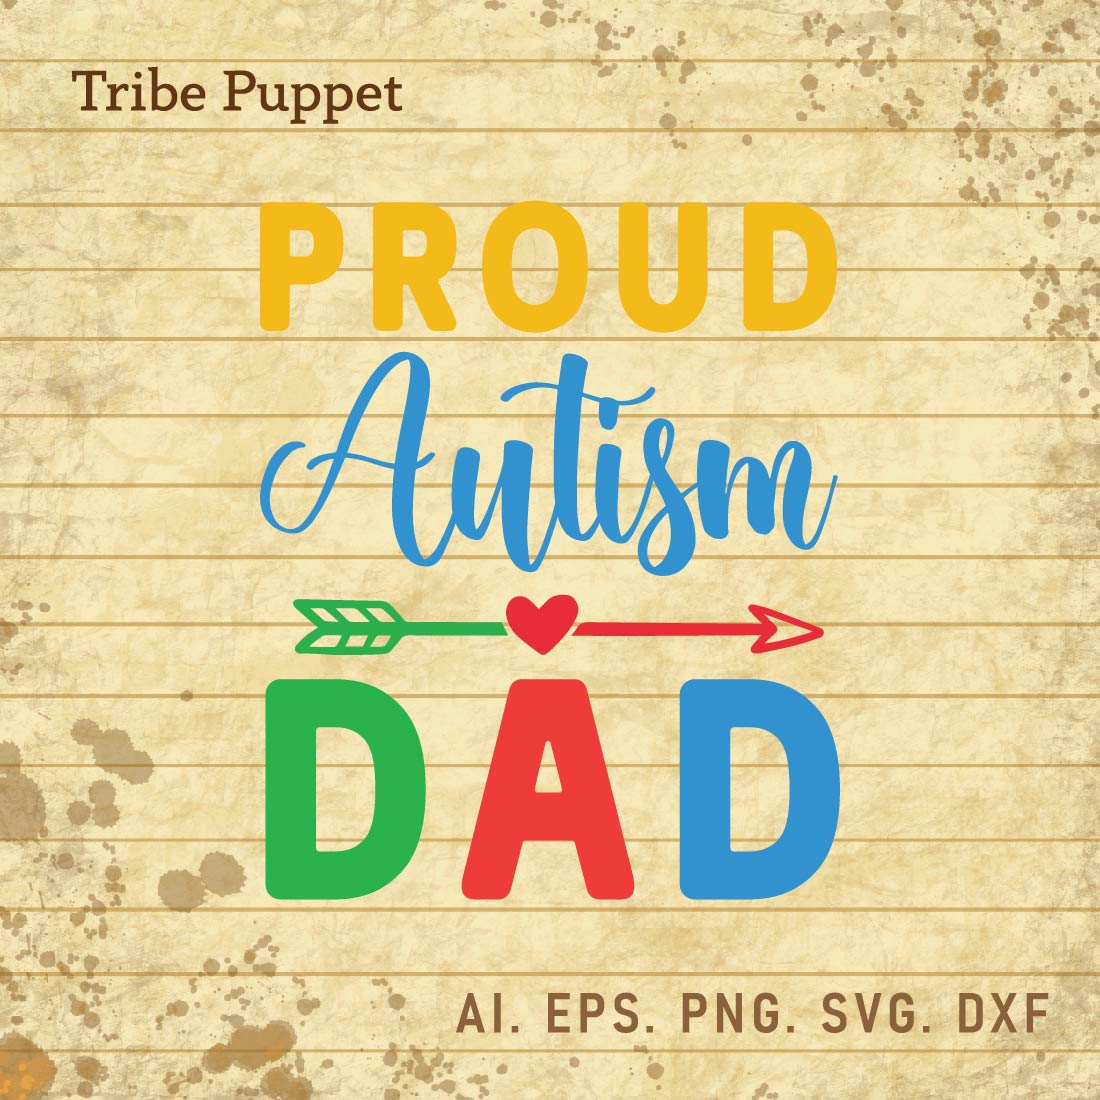 Autism Quotes cover image.